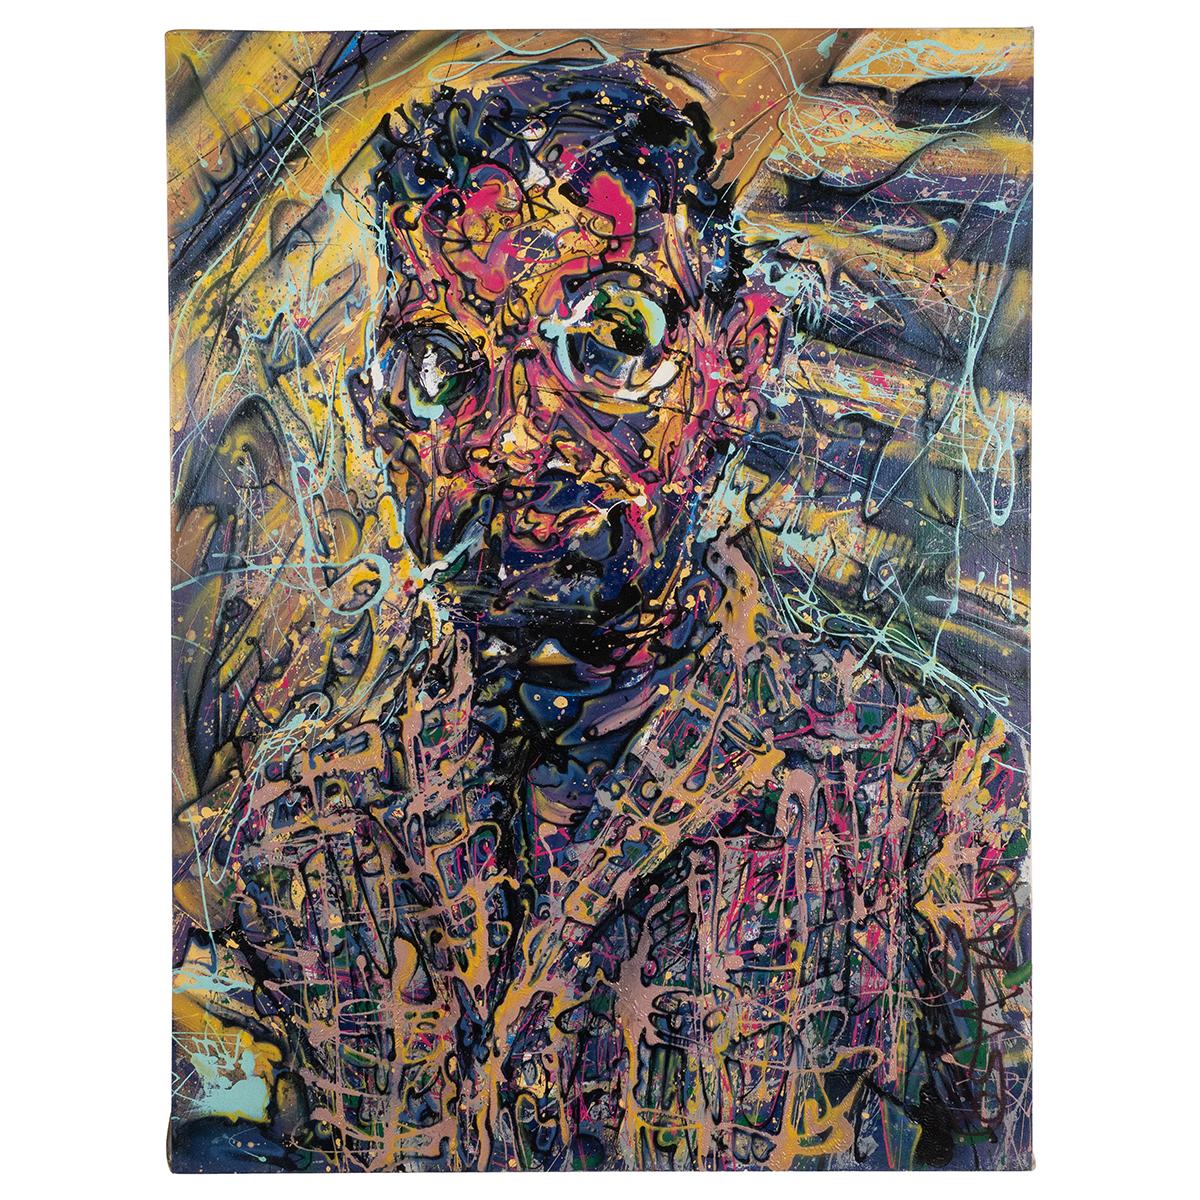 Modern impressionistic portrait of a smoking man by Costain. Oil on canvas.